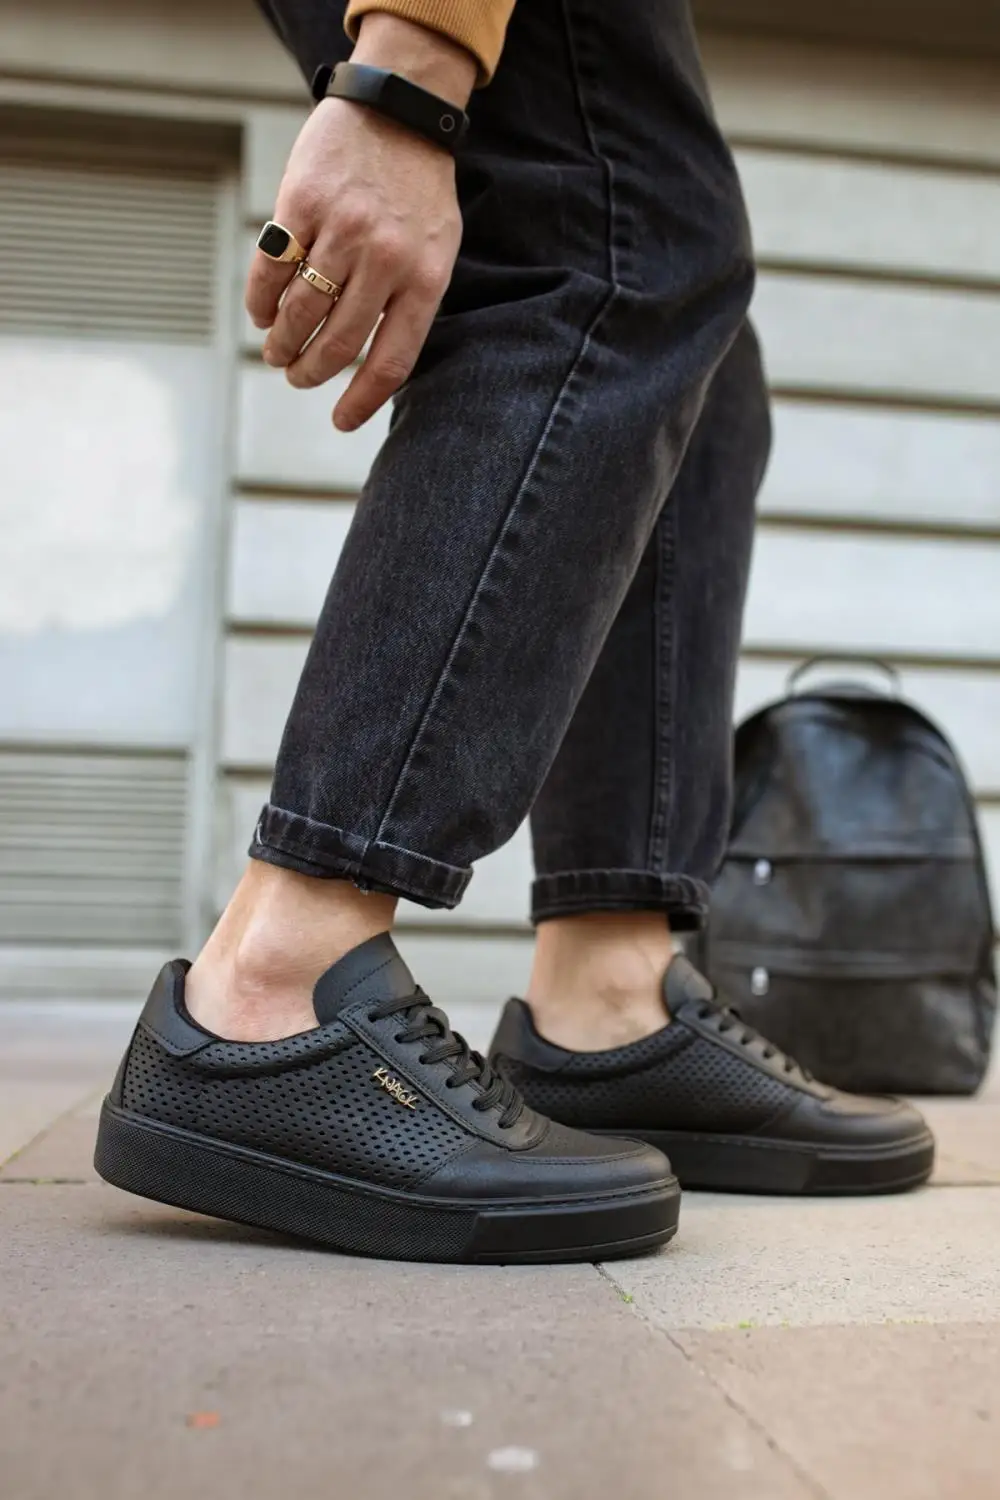 

Knack Causal Men Shoes Black Color High White Base Original Design Brand Laced Young Casual Trend Style Fashion Stylish Summer 011